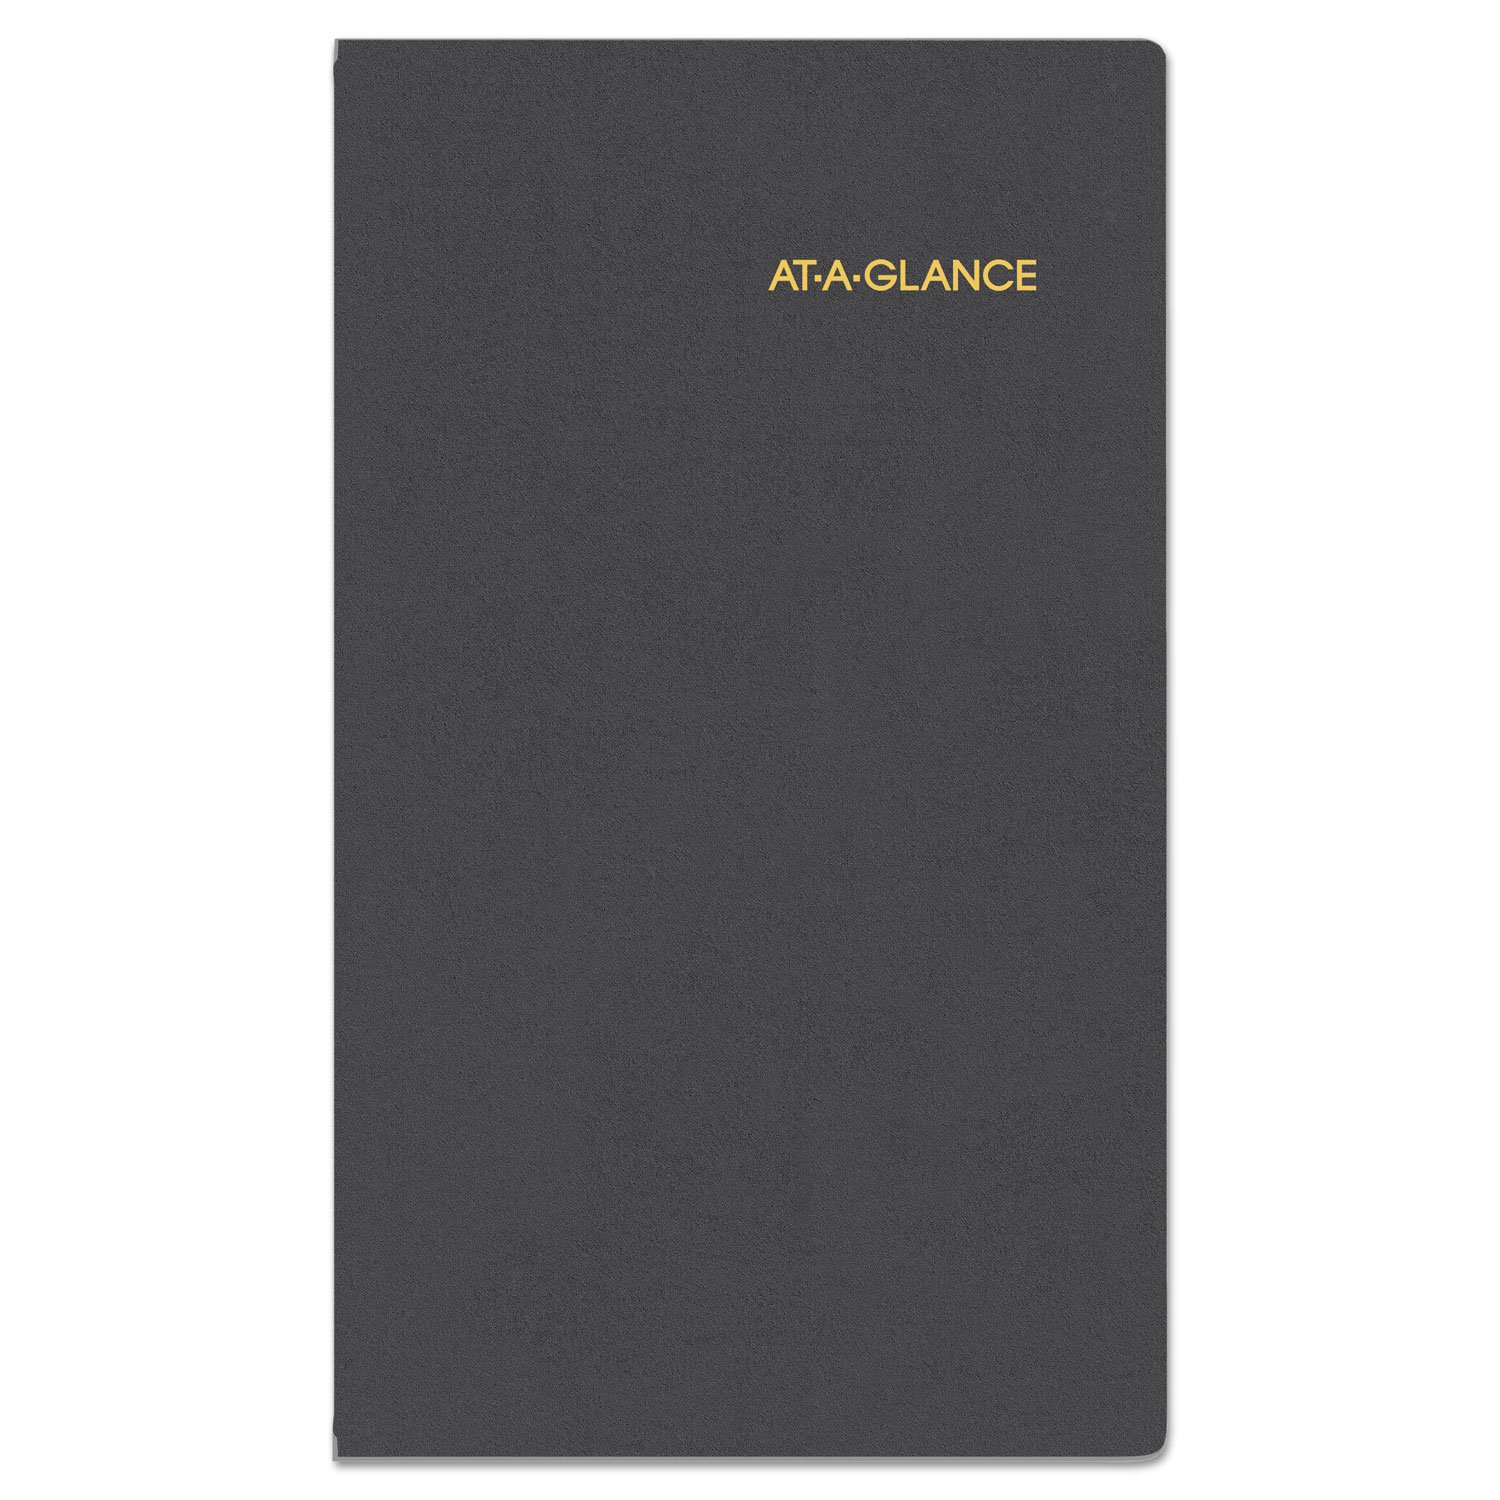 Compact Weekly Appointment Book, 6 1/4 x 3 1/4, Black, 2020